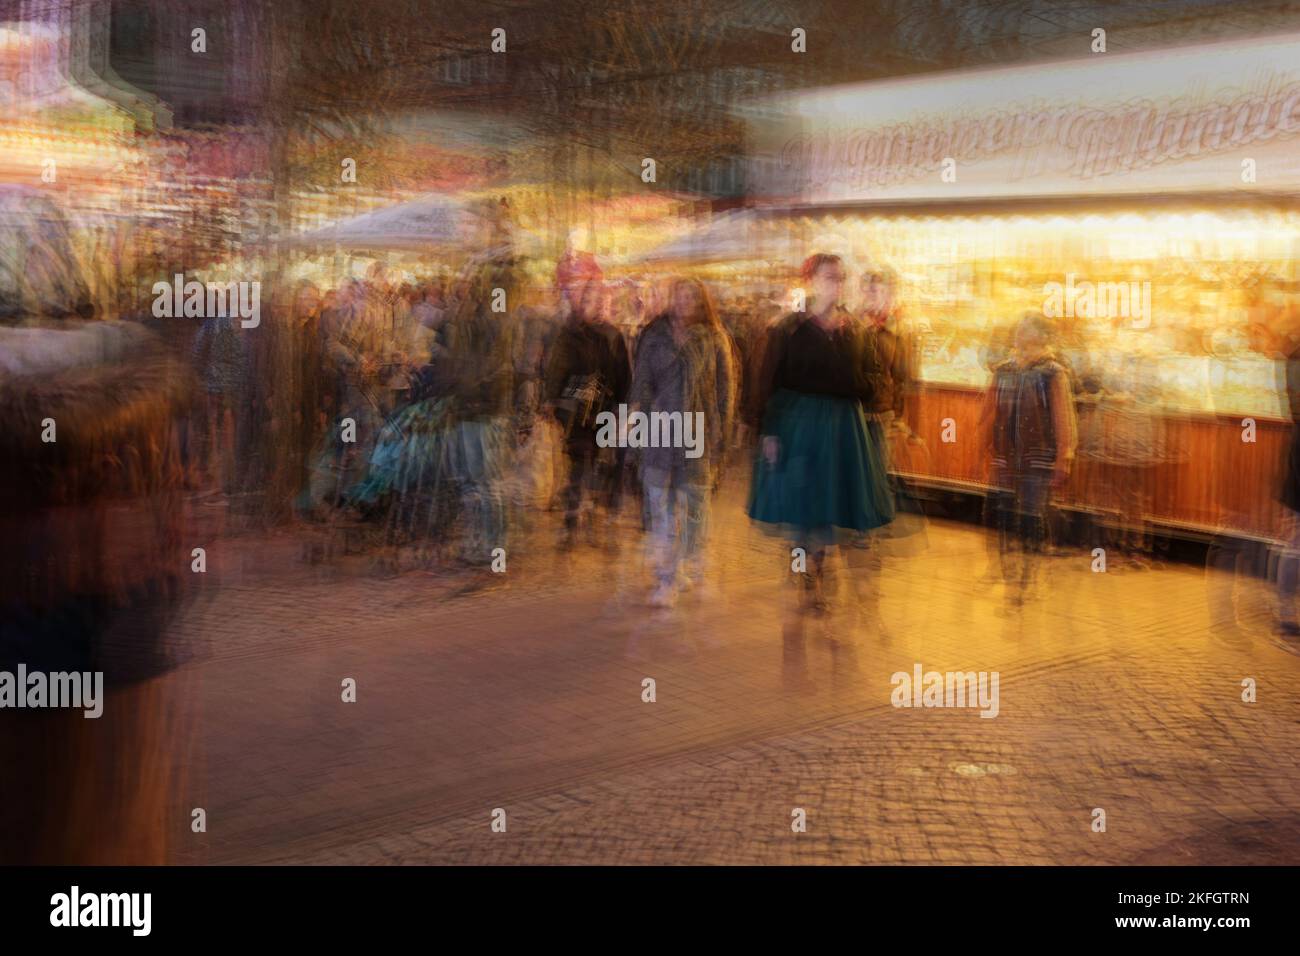 Multiple exposure of people walking on a Christmas fair market at night, colorful abstract image, copy space Stock Photo